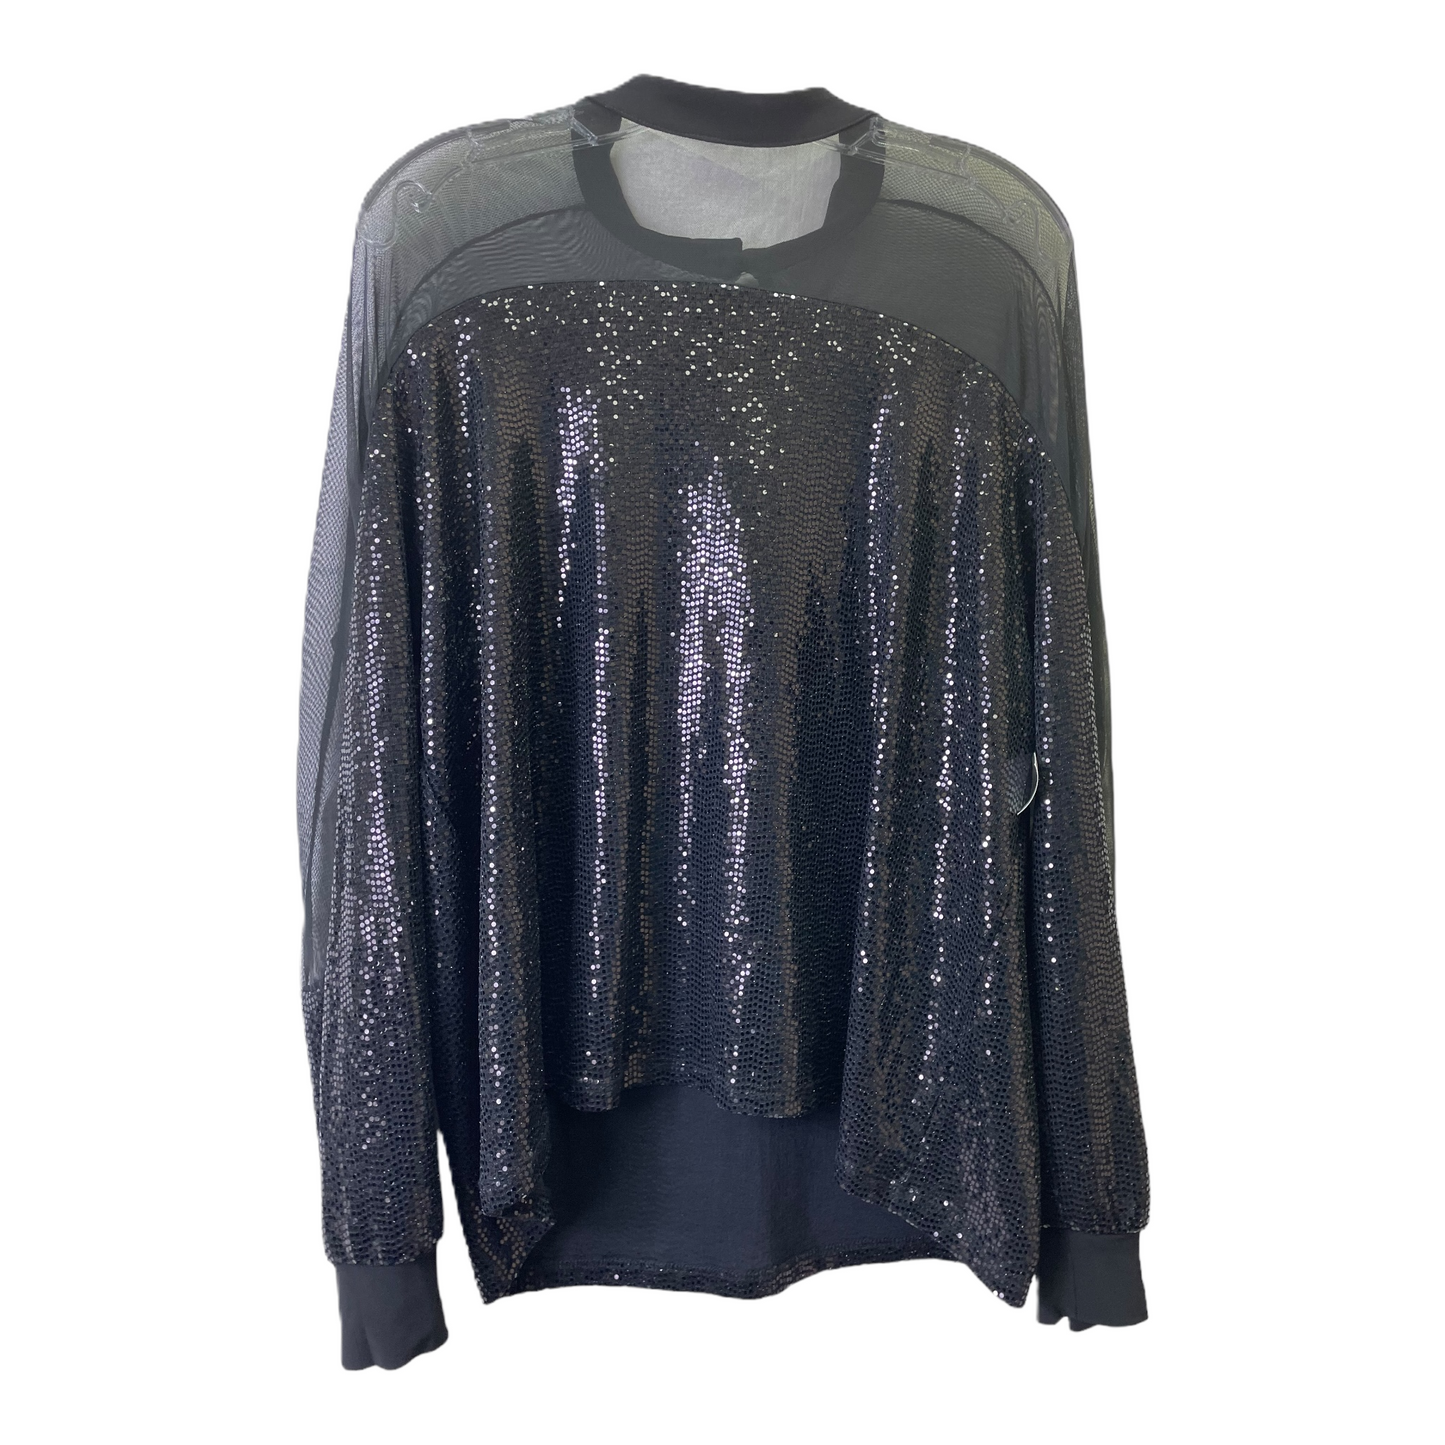 Black Top Long Sleeve By Nine West, Size: L